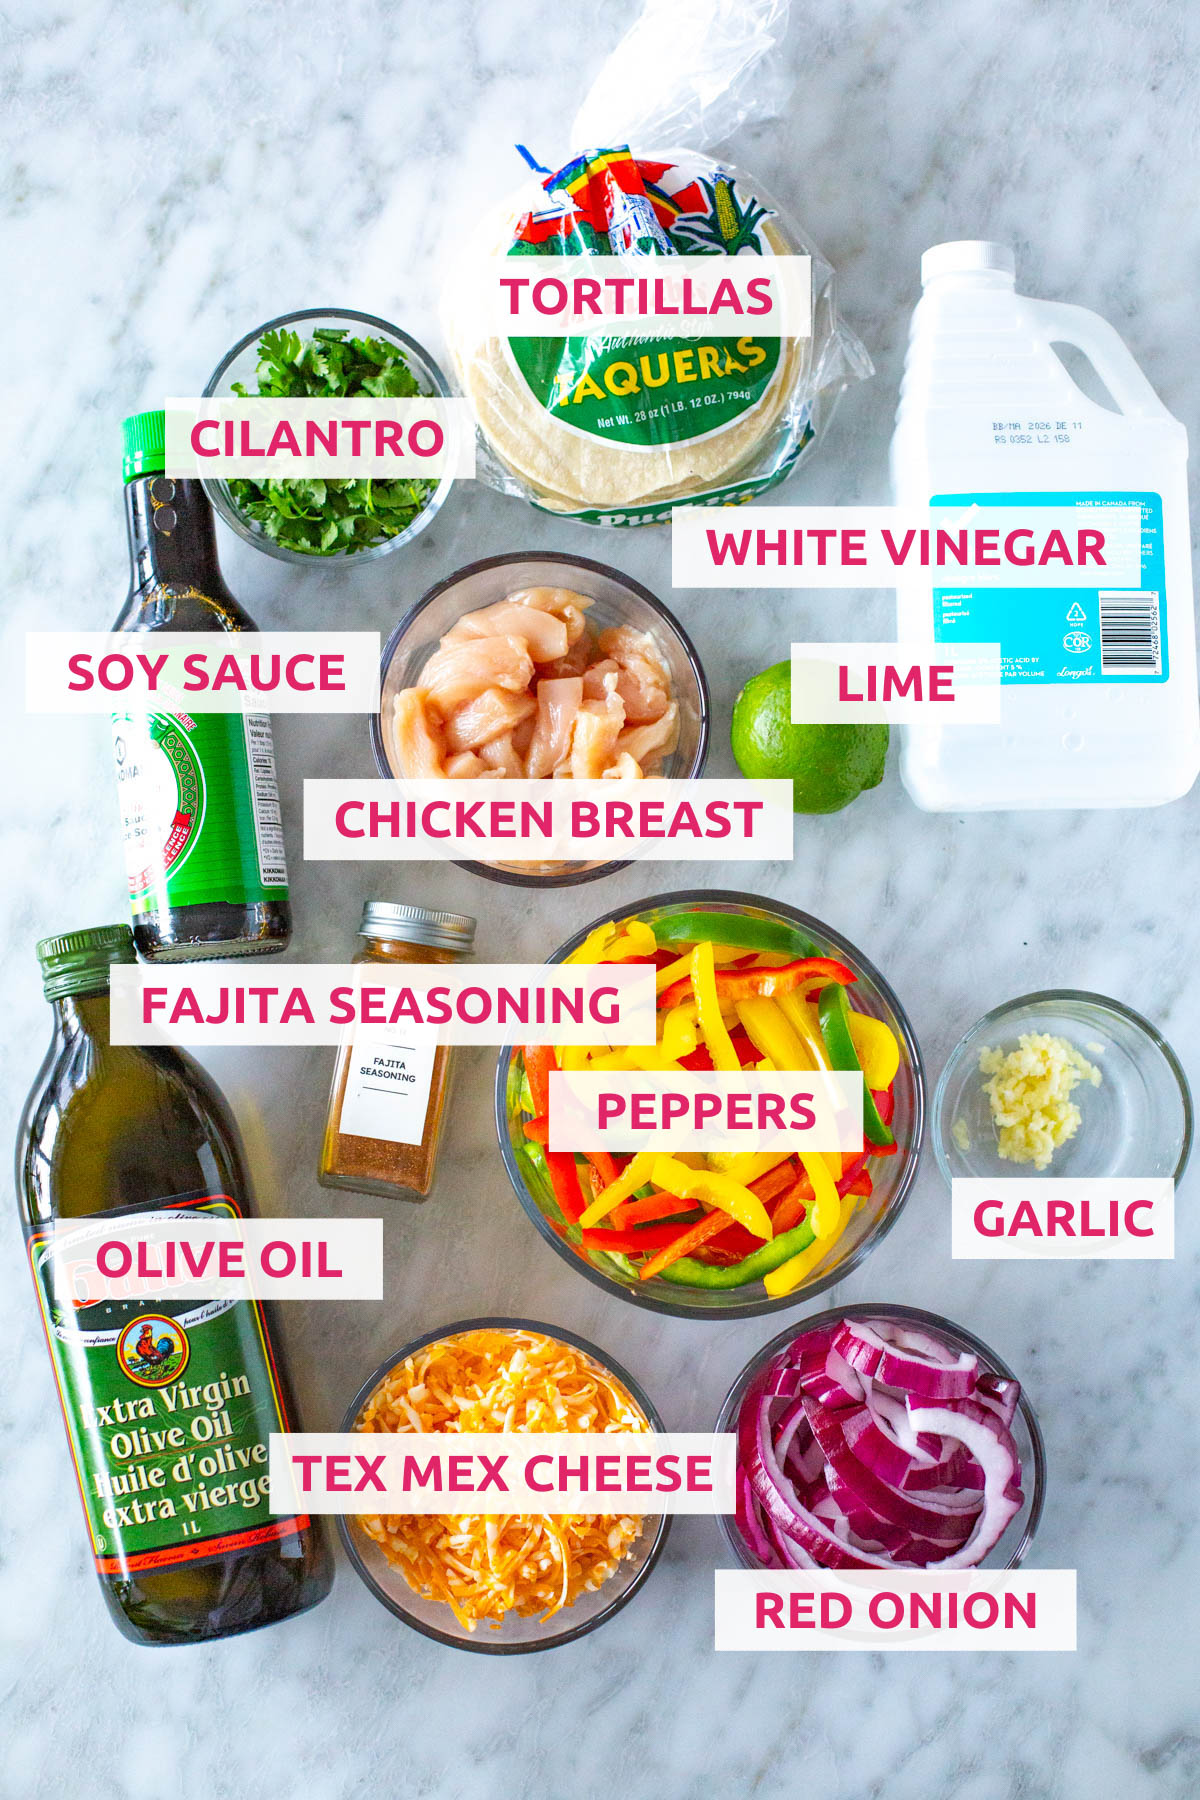 Ingredients for sheet pan chicken fajitas: chicken breast, tex mex cheese, olive oil, red onion, peppers, garlic, fajita marinade, soy sauce, cilantro, corn tortillas, white vinegar and lime. 